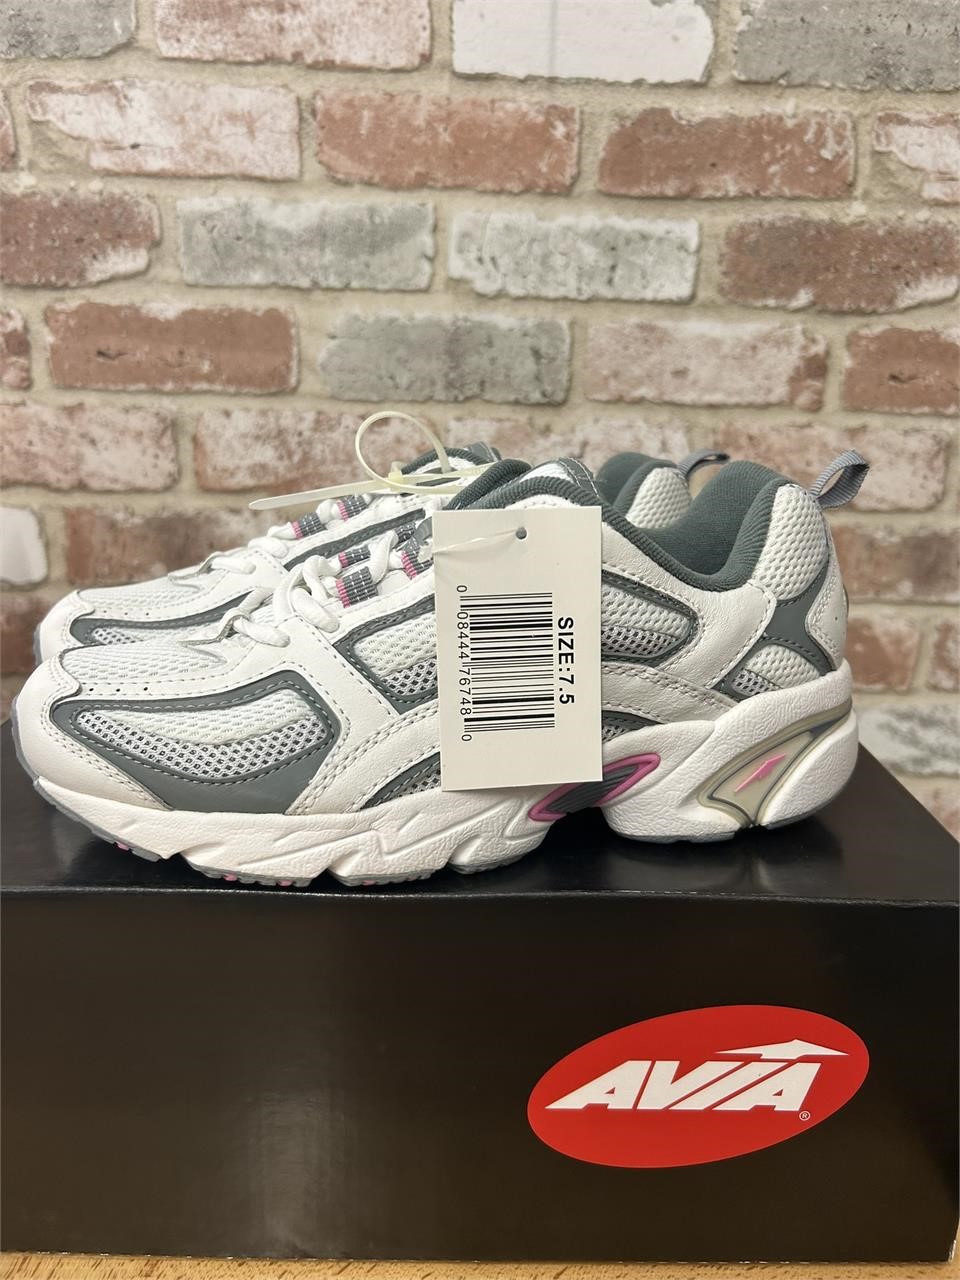 New, Never Worn Avia size 7.5 womens tennis shoes